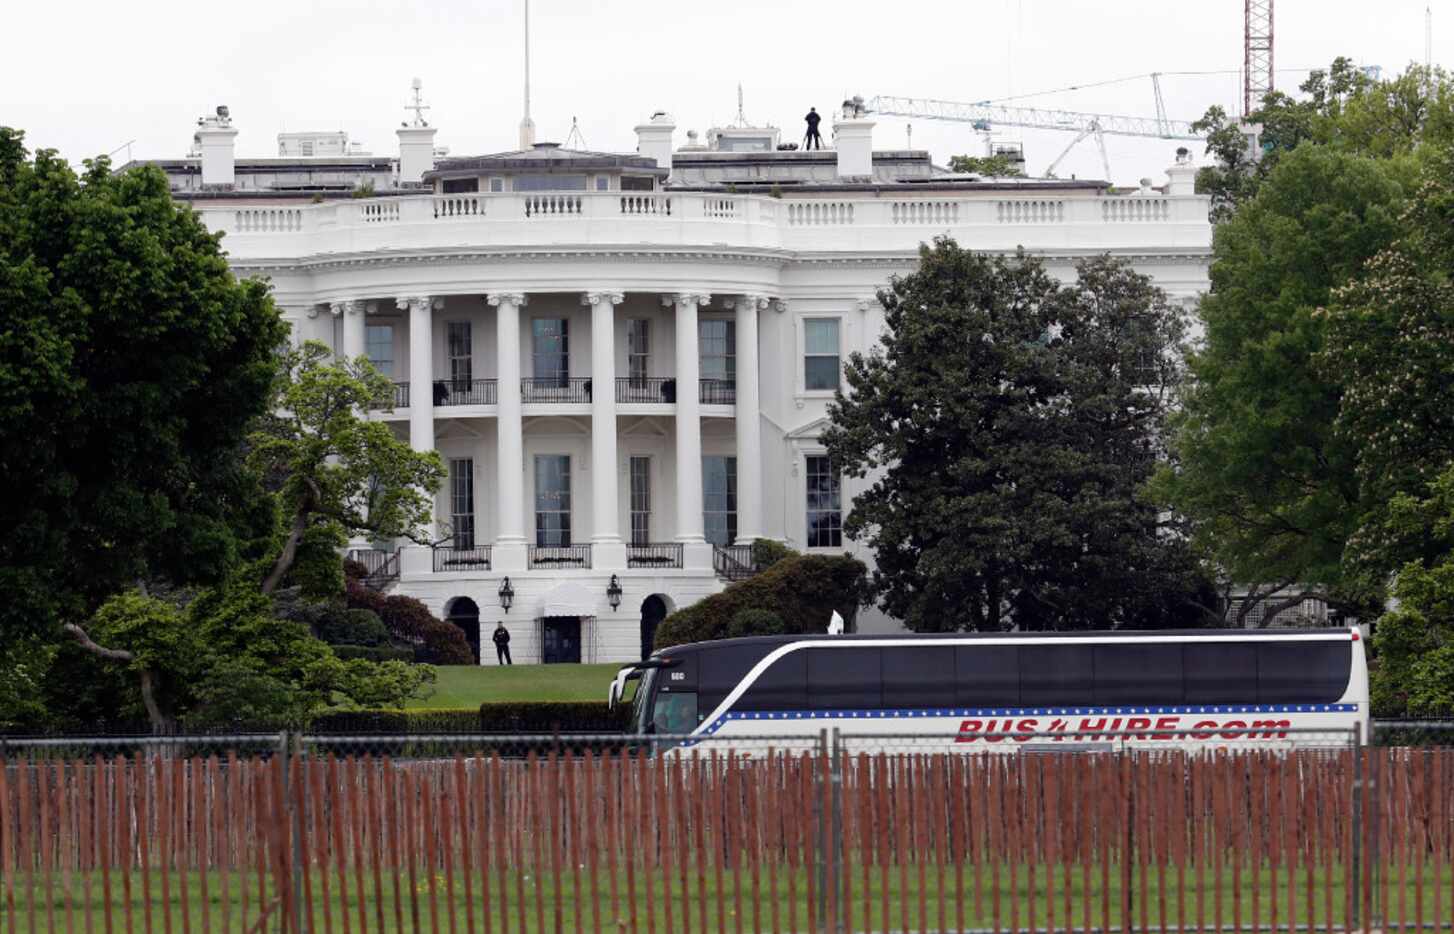 A bus carrying senators arrives at the White House for a briefing on the threat posed by...